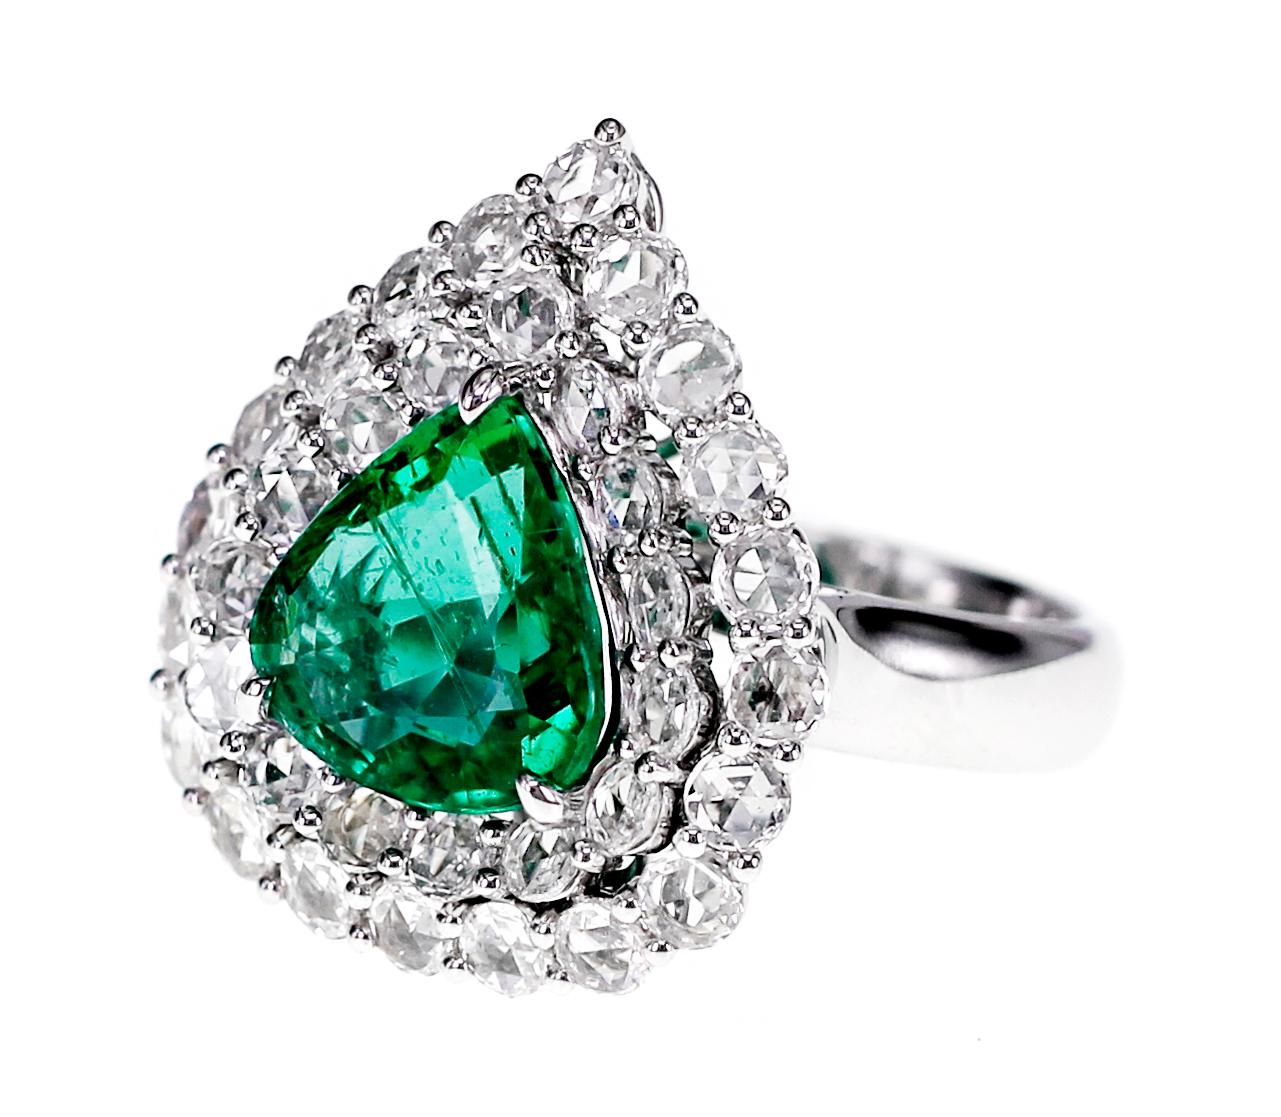 Top quality, vivid green emerald of 2.90 carat size is set along with 1.43 carat of F color Vs clarity old European cut diamond, 
Ring Size: US 6.25